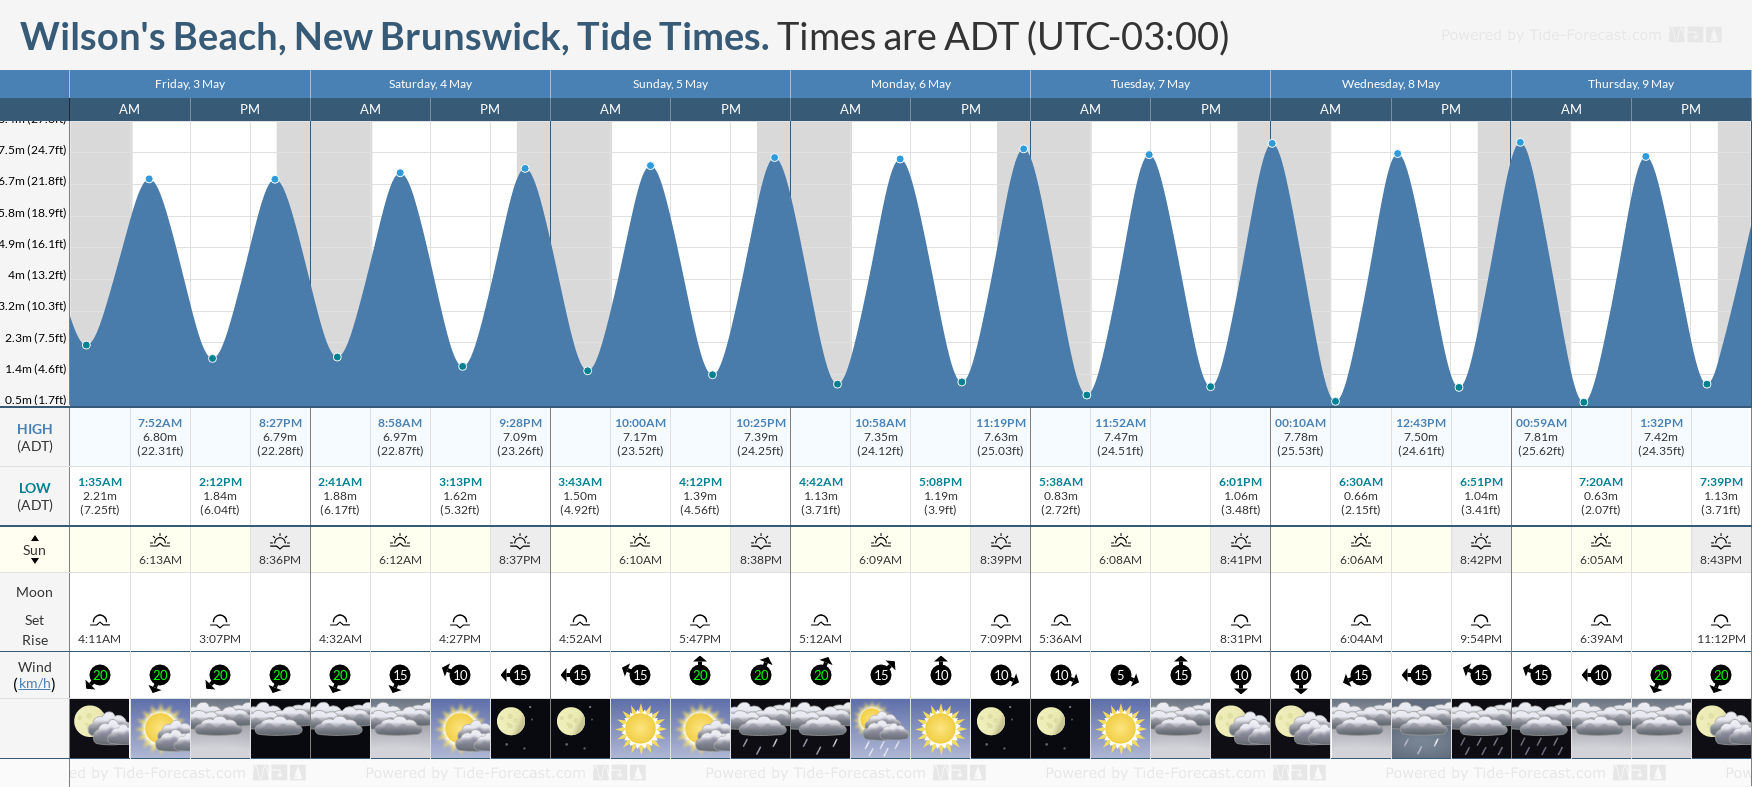 Wilson's Beach, New Brunswick Tide Chart including high and low tide tide times for the next 7 days